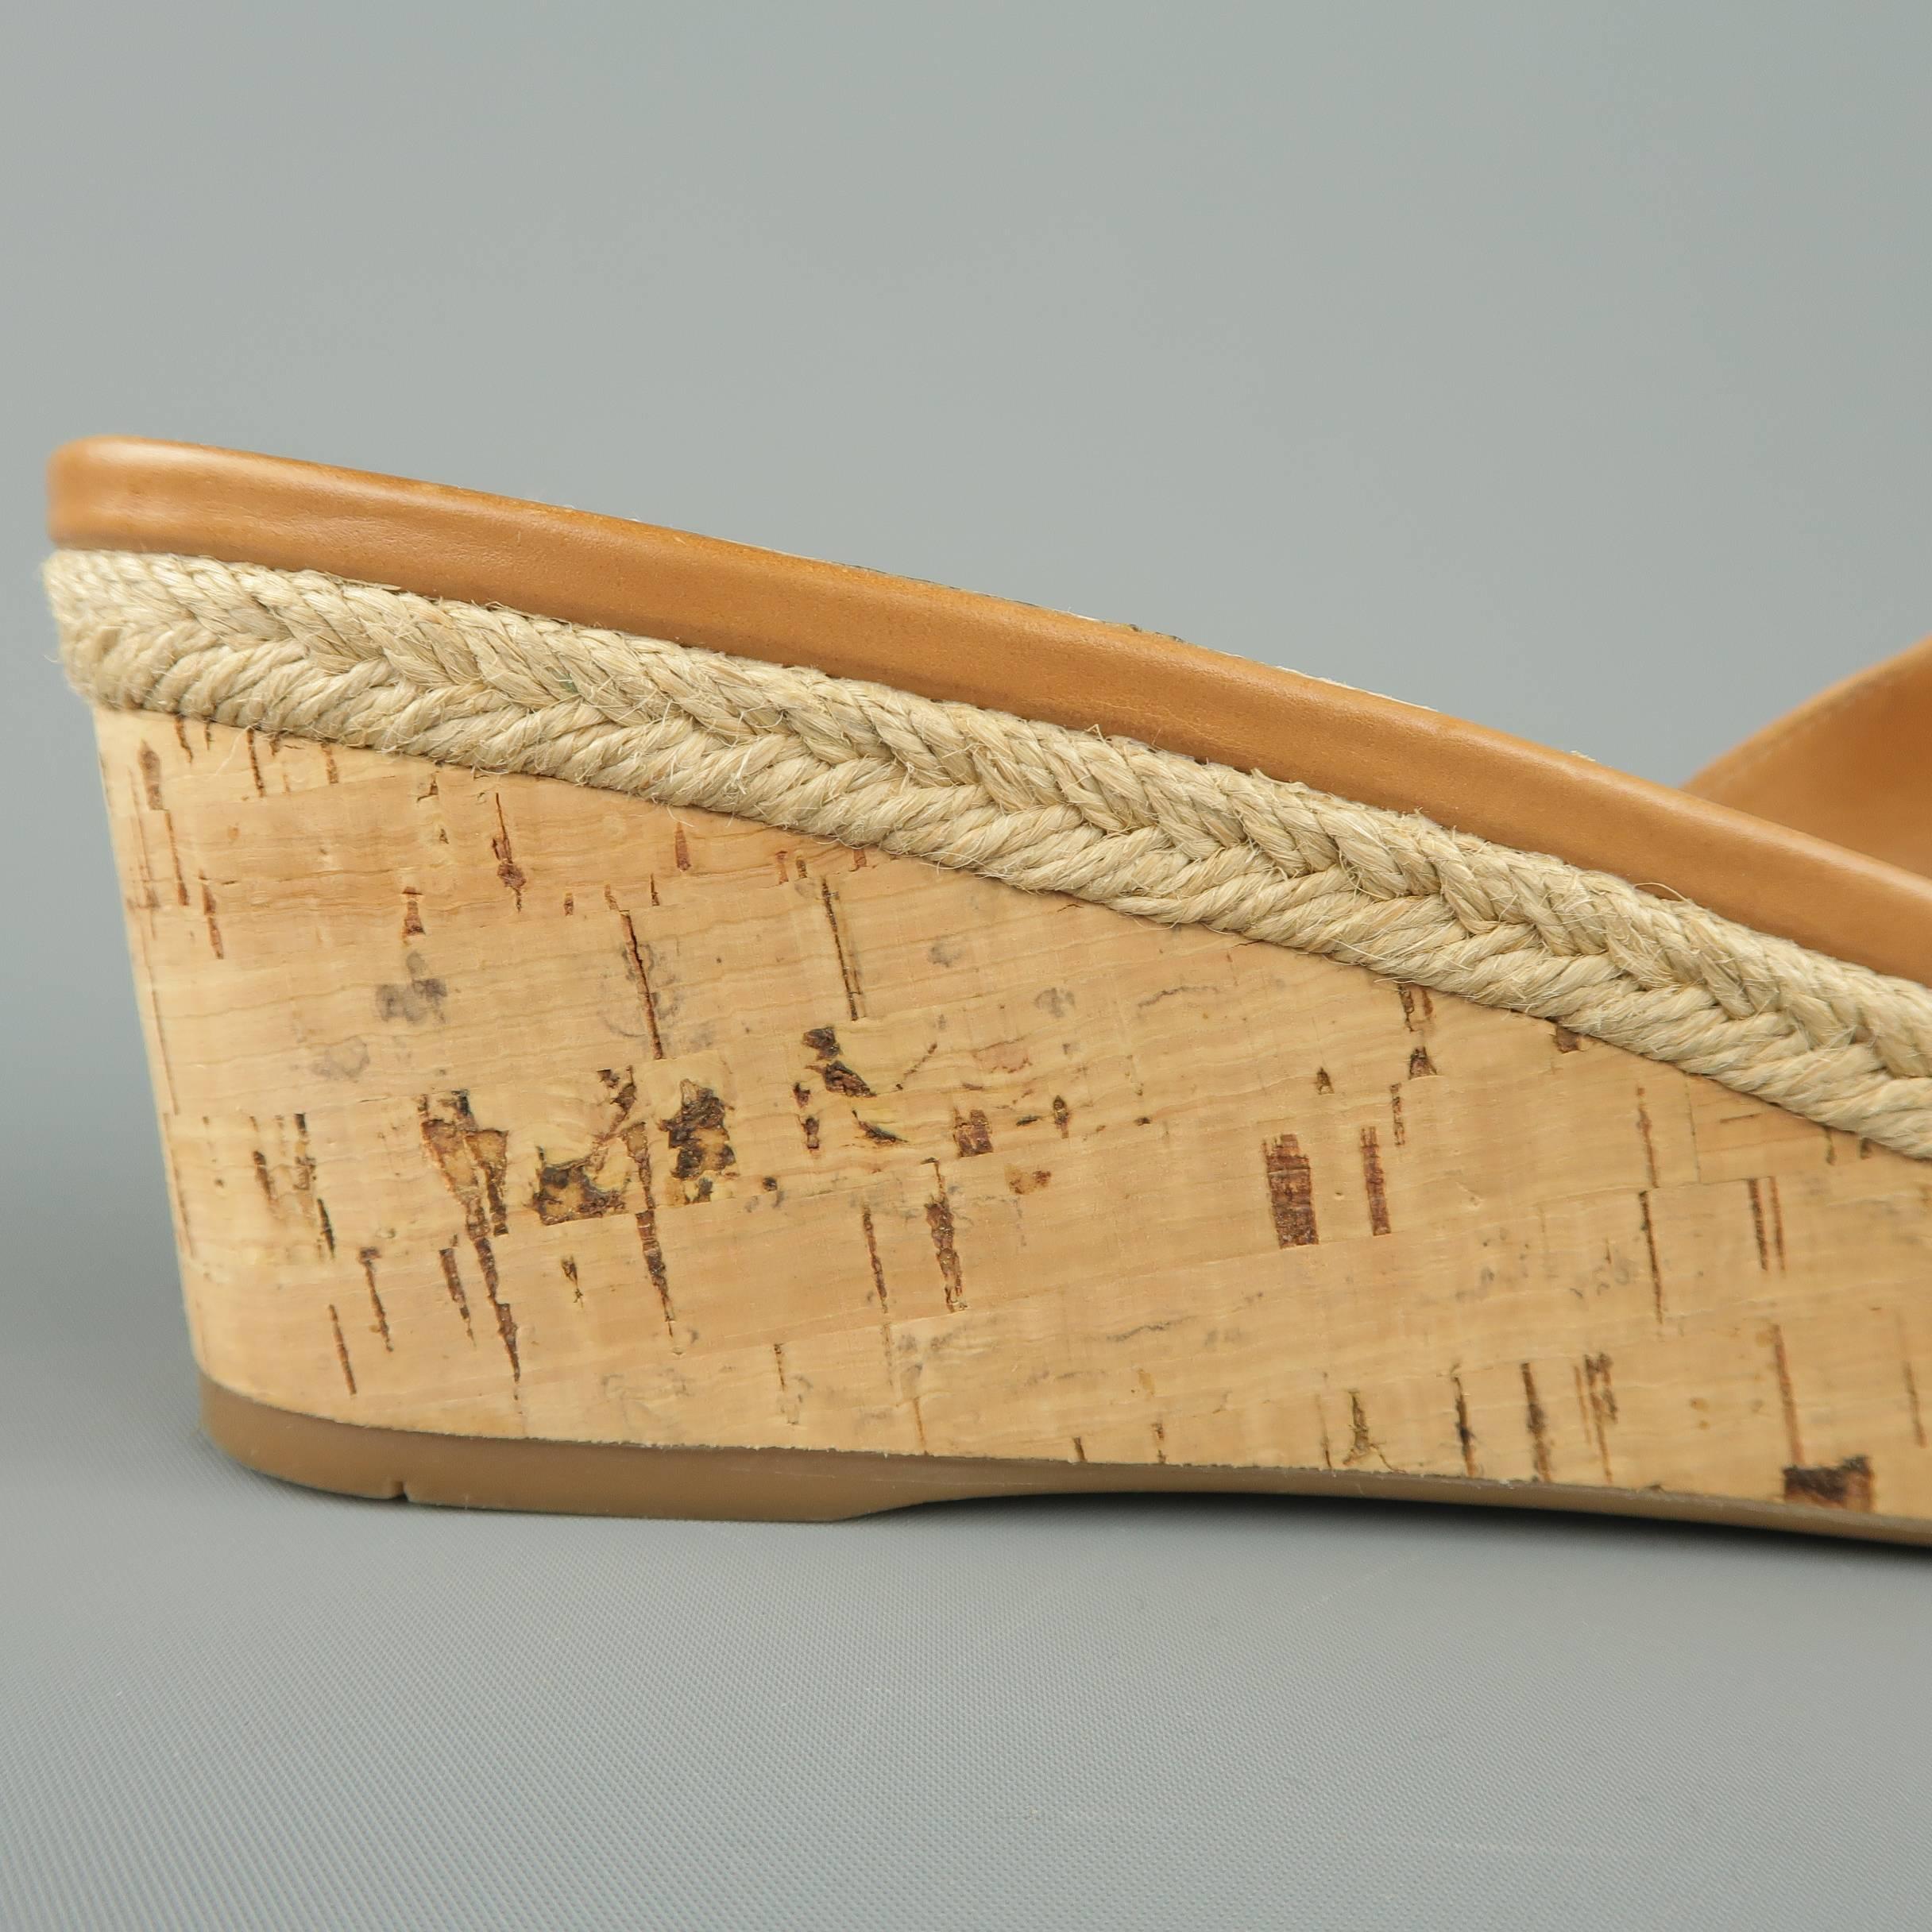 Classic PRADA mules feature a tan X strap and platform cork wedge with braided espadrille detail. Made in Italy.
 
Good Pre-Owned Condition.
Marked: IT 40
 
Measurements:
 
Heel: 2.5 in.
Platform: 1 in.
